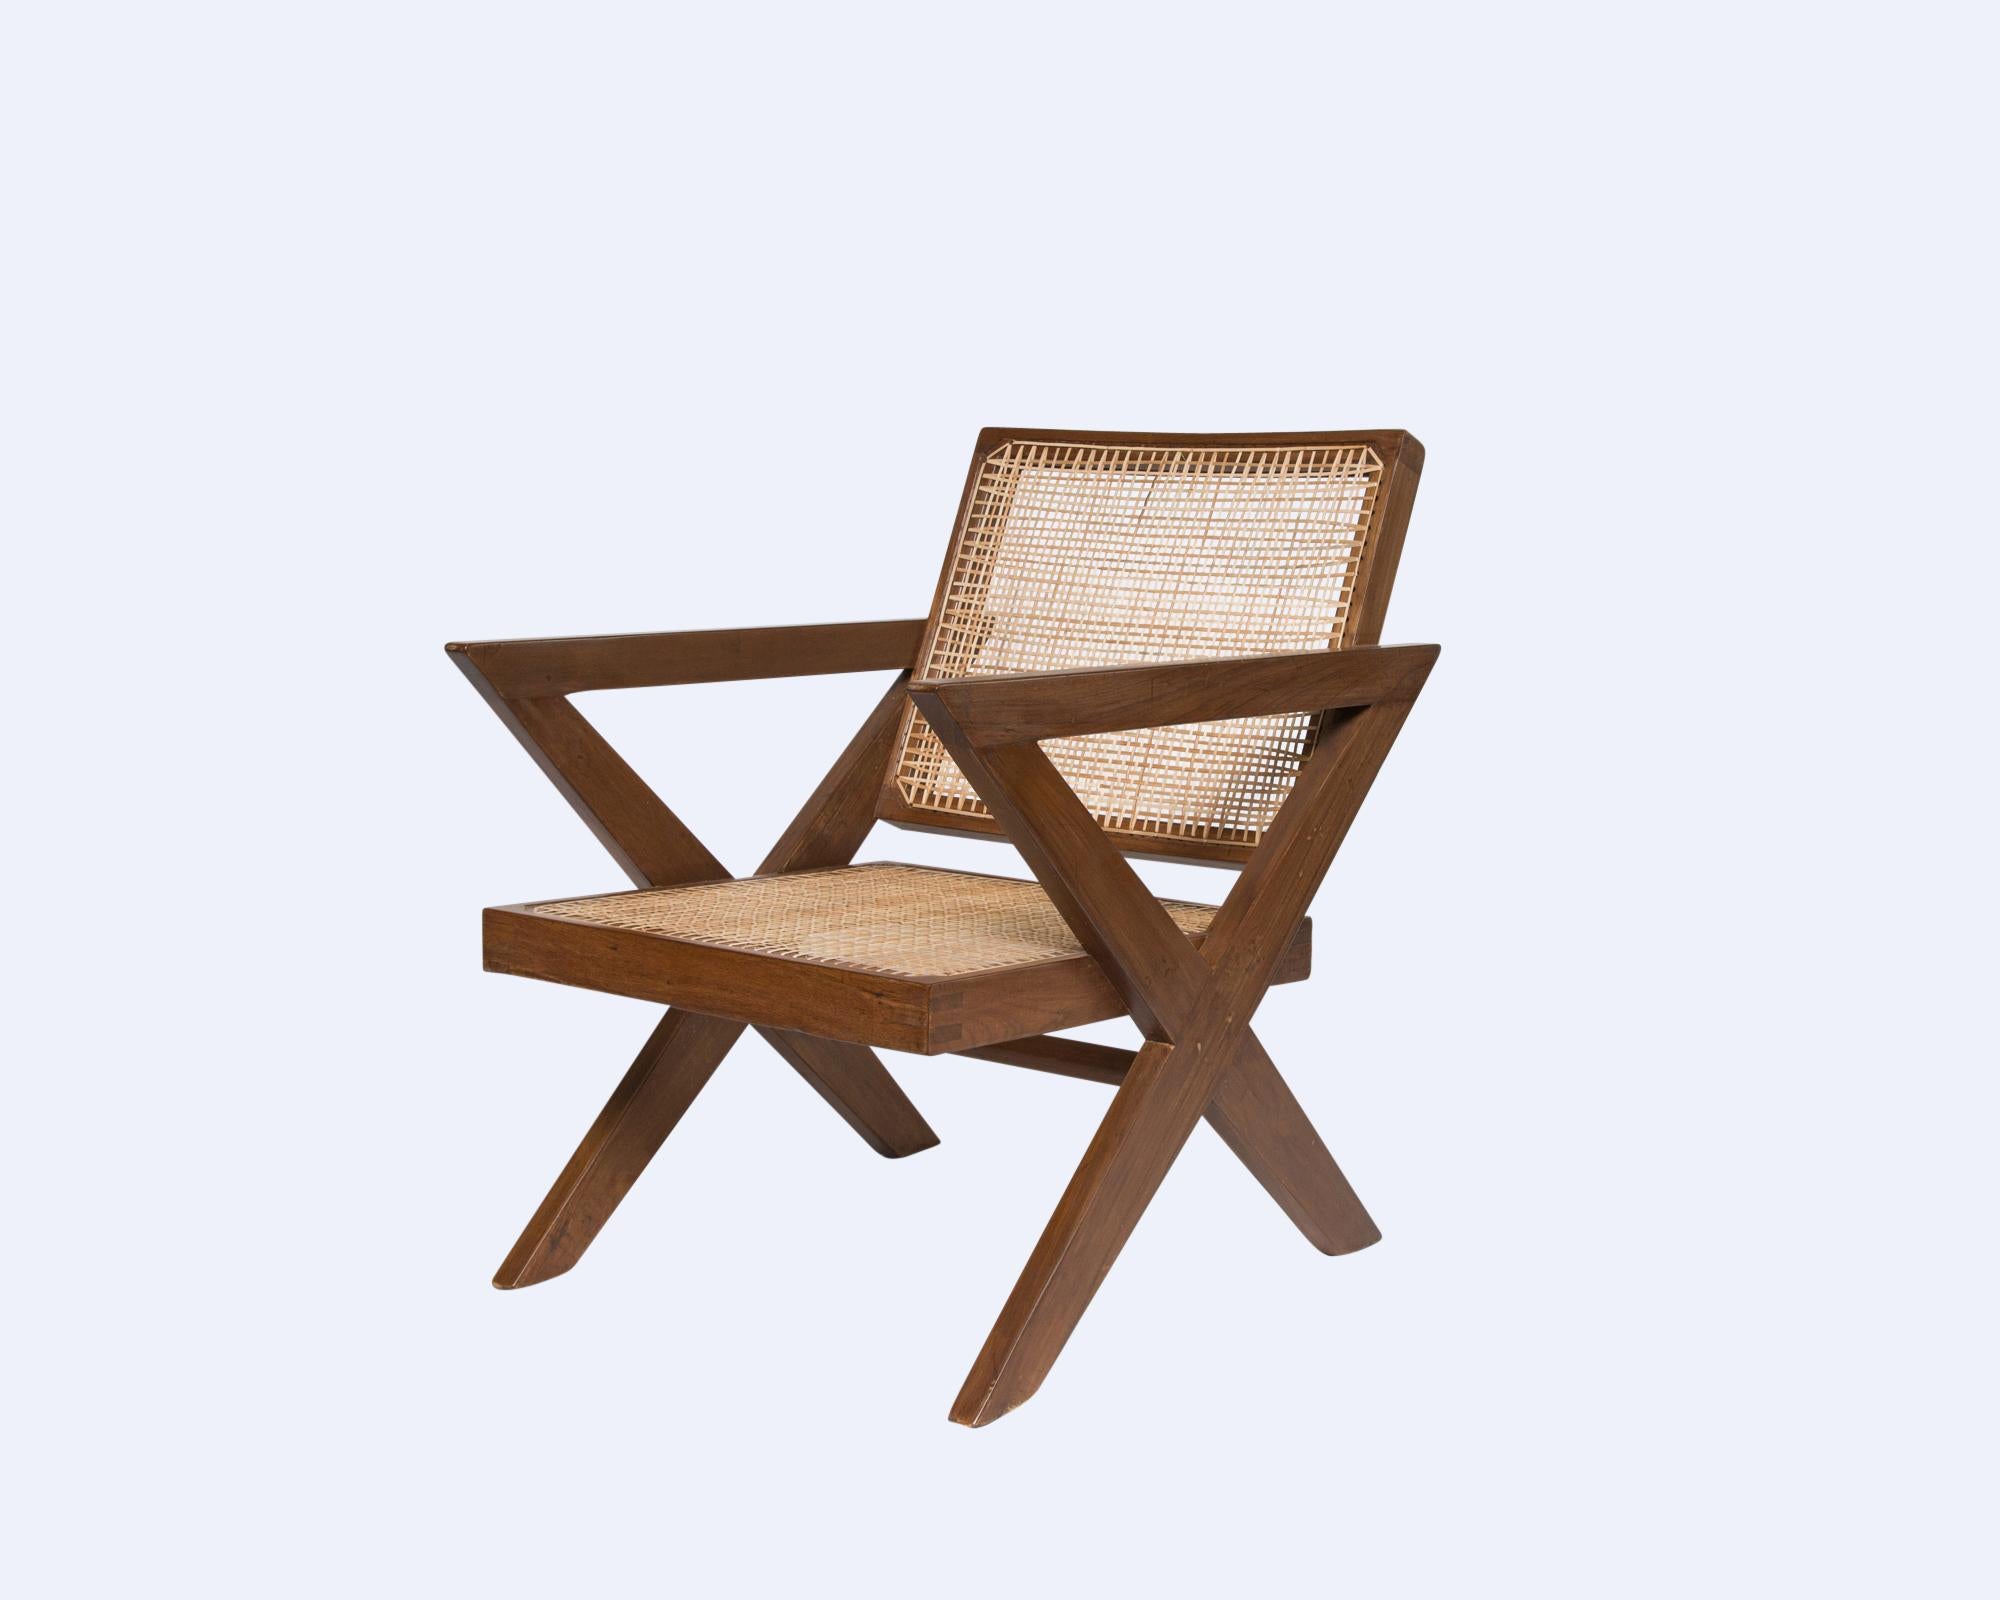 Pierre Jeanneret easy cross chair in teak
• Excellent condition for age
• Includes certificate of authenticity, certified by Jacques Dworczak, world-renowned Pierre Jeanneret authenticator and collector, author of the Assouline book 